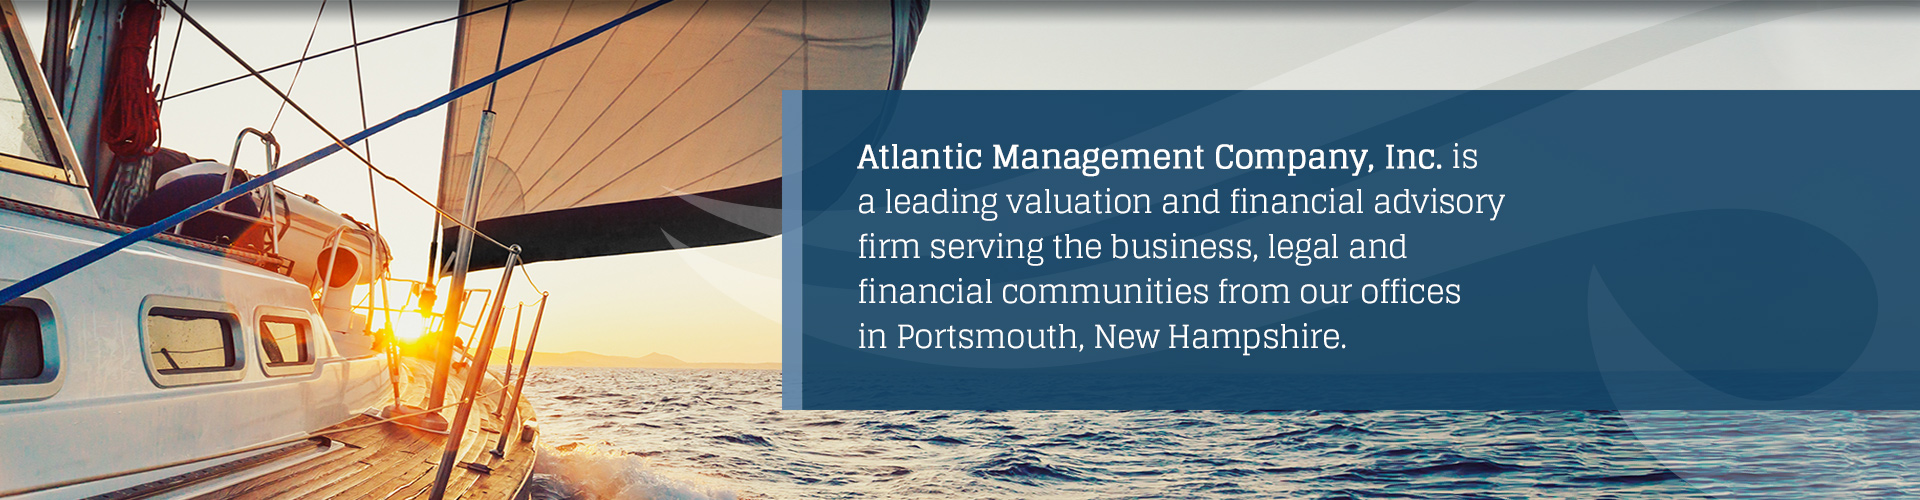 Home - Atlantic Management is a leading valuation and financial advisory firm serving the business, legal and financial communities from our offices in Portsmouth, NH.